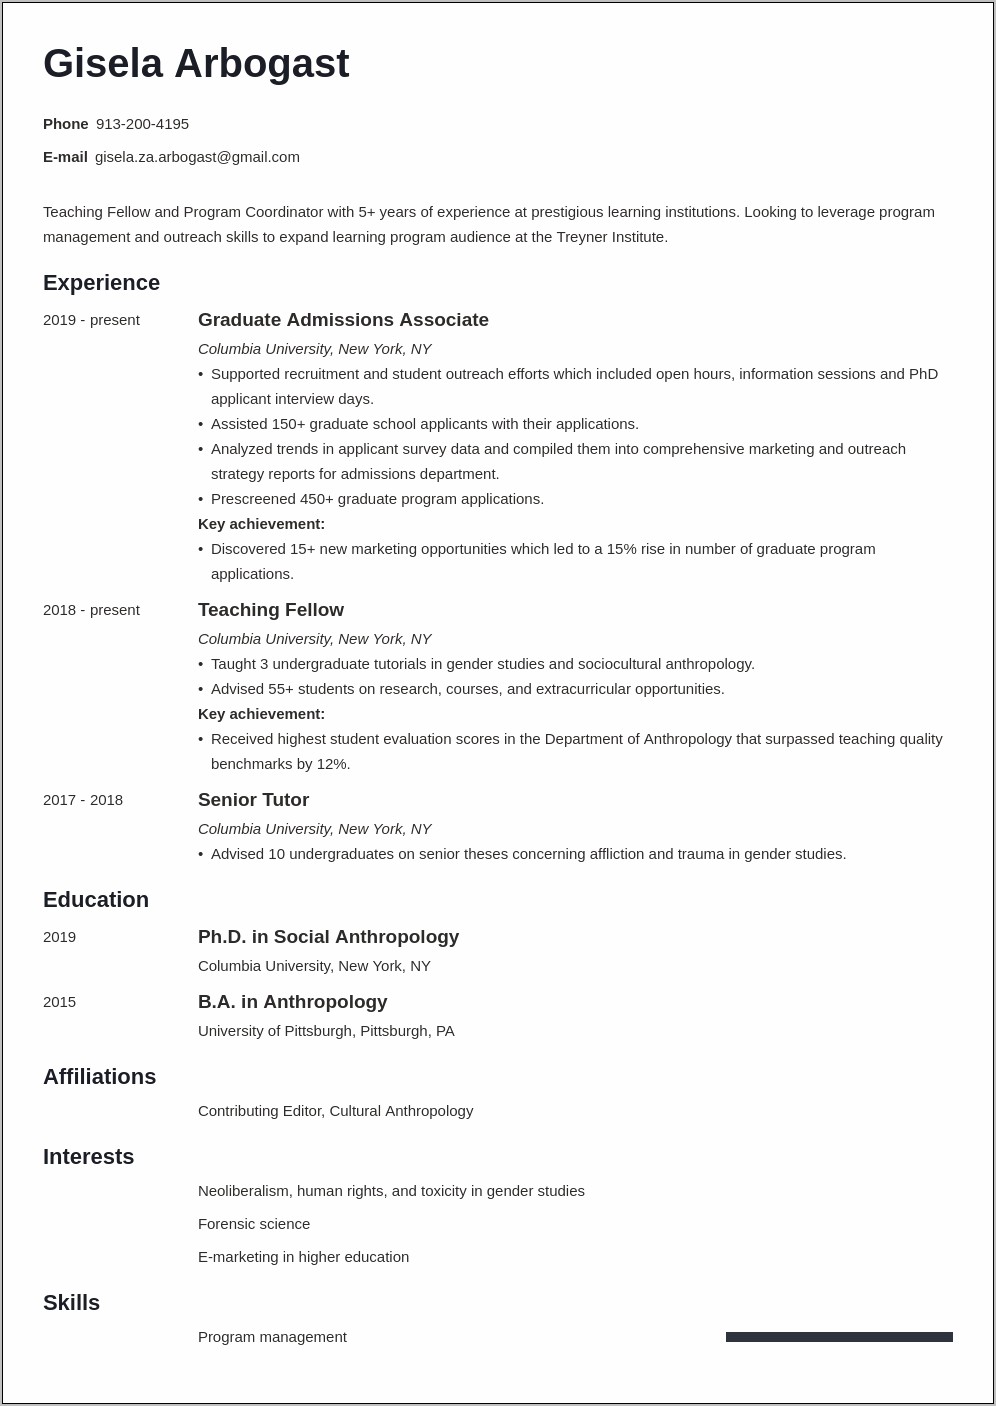 Resume Objective Statement Forensic Science